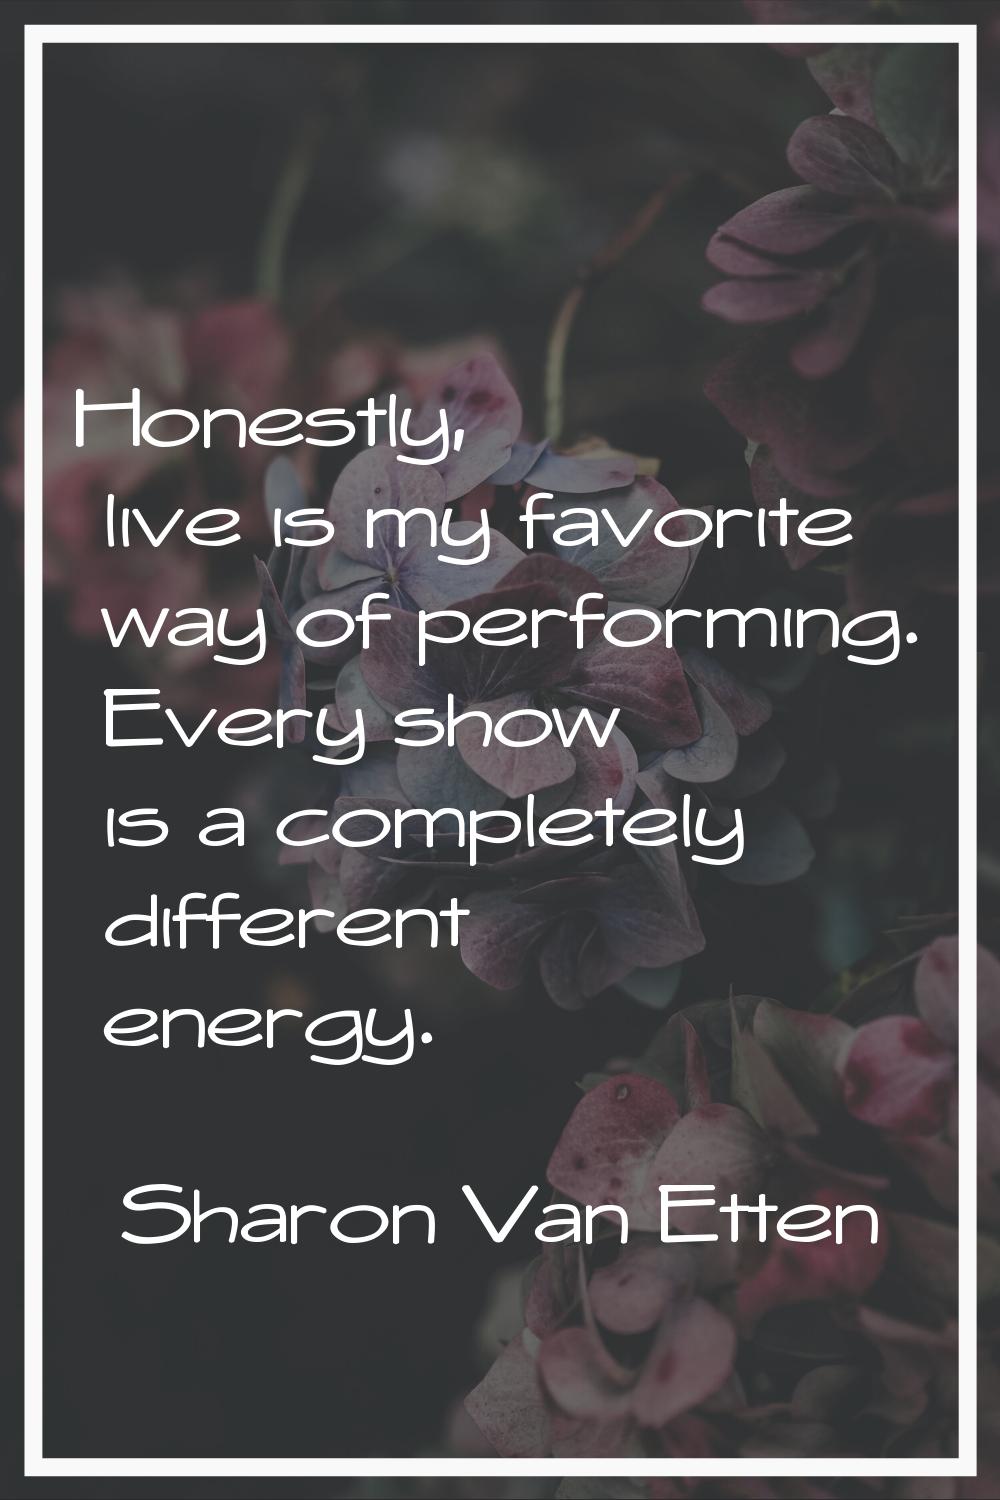 Honestly, live is my favorite way of performing. Every show is a completely different energy.